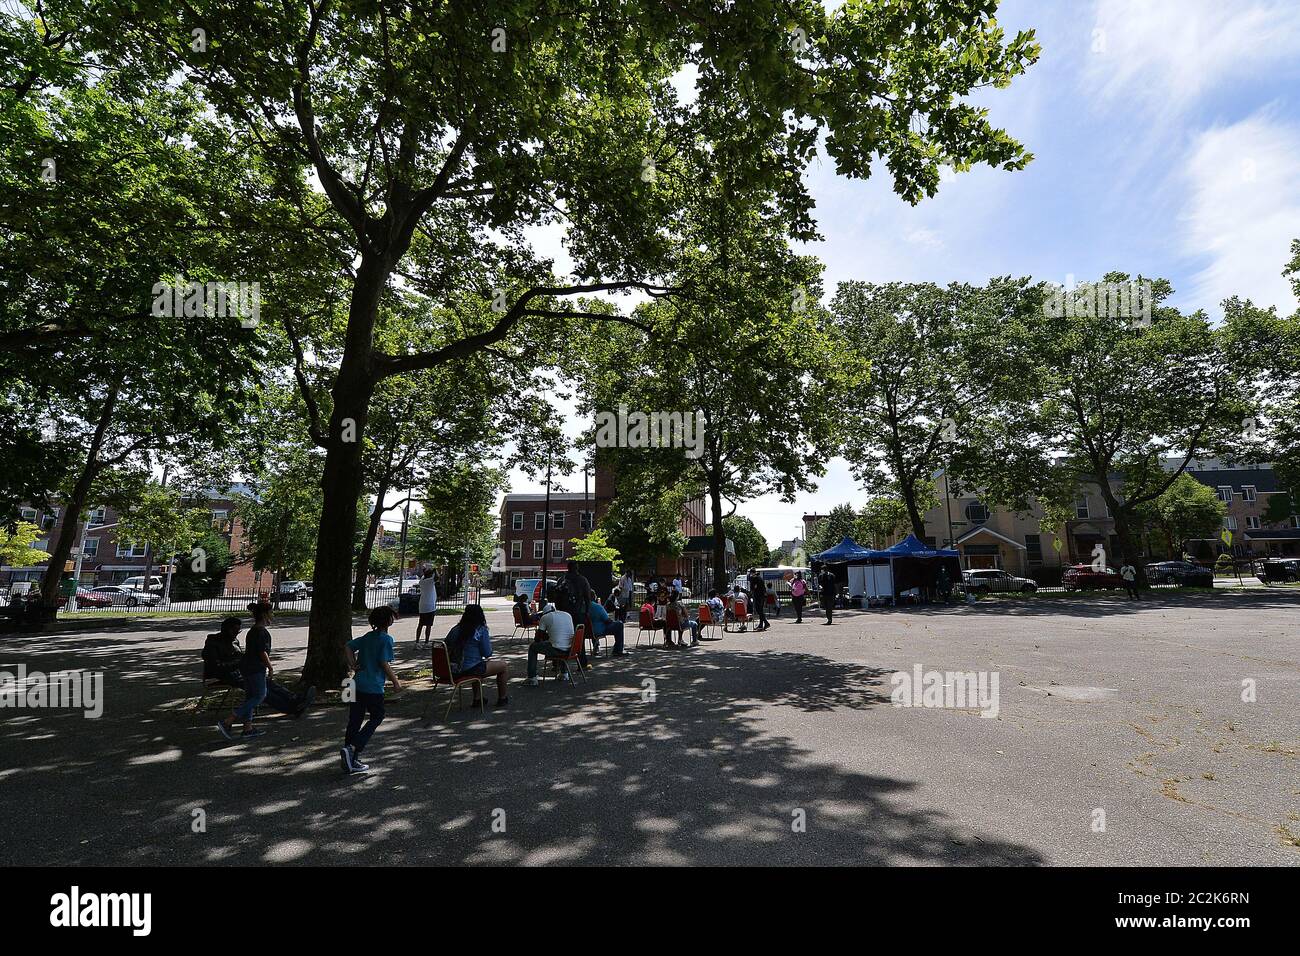 New York City, USA. 17th June, 2020. Practicing social distancing, people wait in chairs for their turn to recieve free COVID-19 testing at the Clinton playground in the Bronx borough of New York, NY, June 17, 2020. Under New York City Mayor Bill de Blasio, the city is expanding its testing sites citywide and opening mobile units to provide free COVID-19 testing to anyone. (Anthony Behar/Sipa USA) Credit: Sipa USA/Alamy Live News Stock Photo